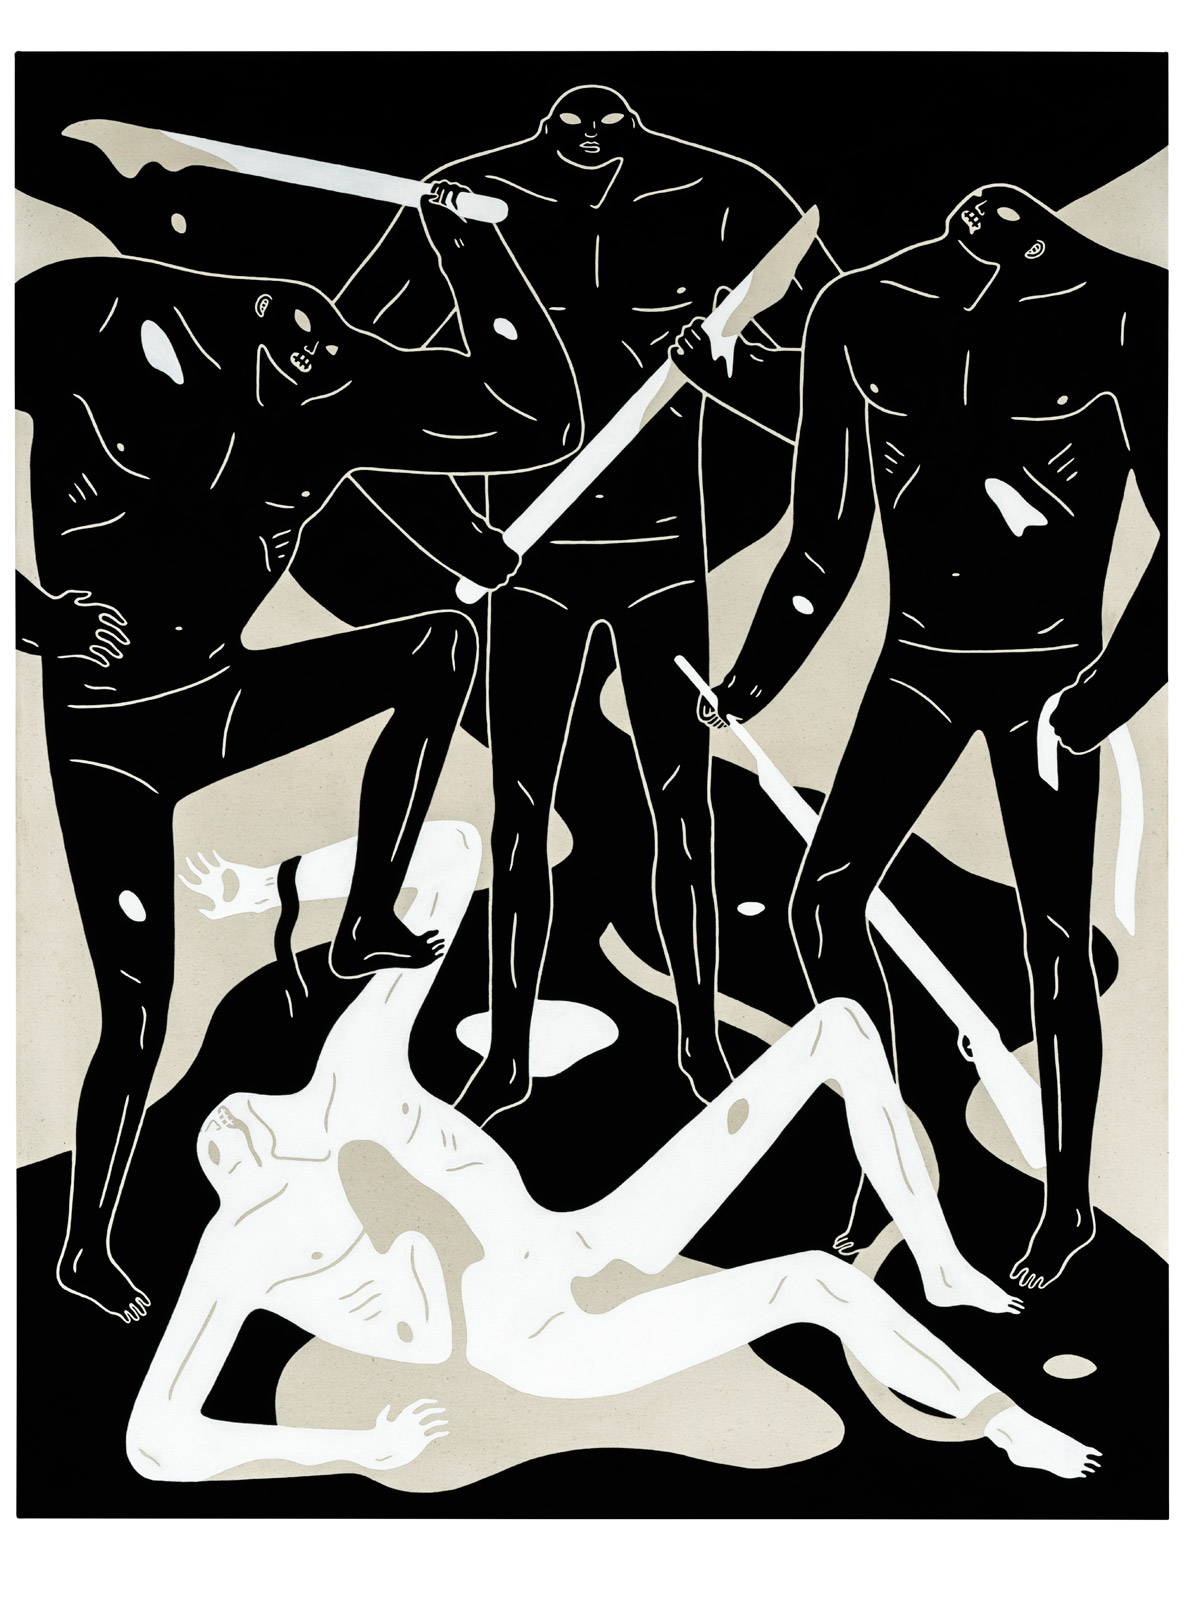 "The Shadow of Men" by Artist Cleon Peterson